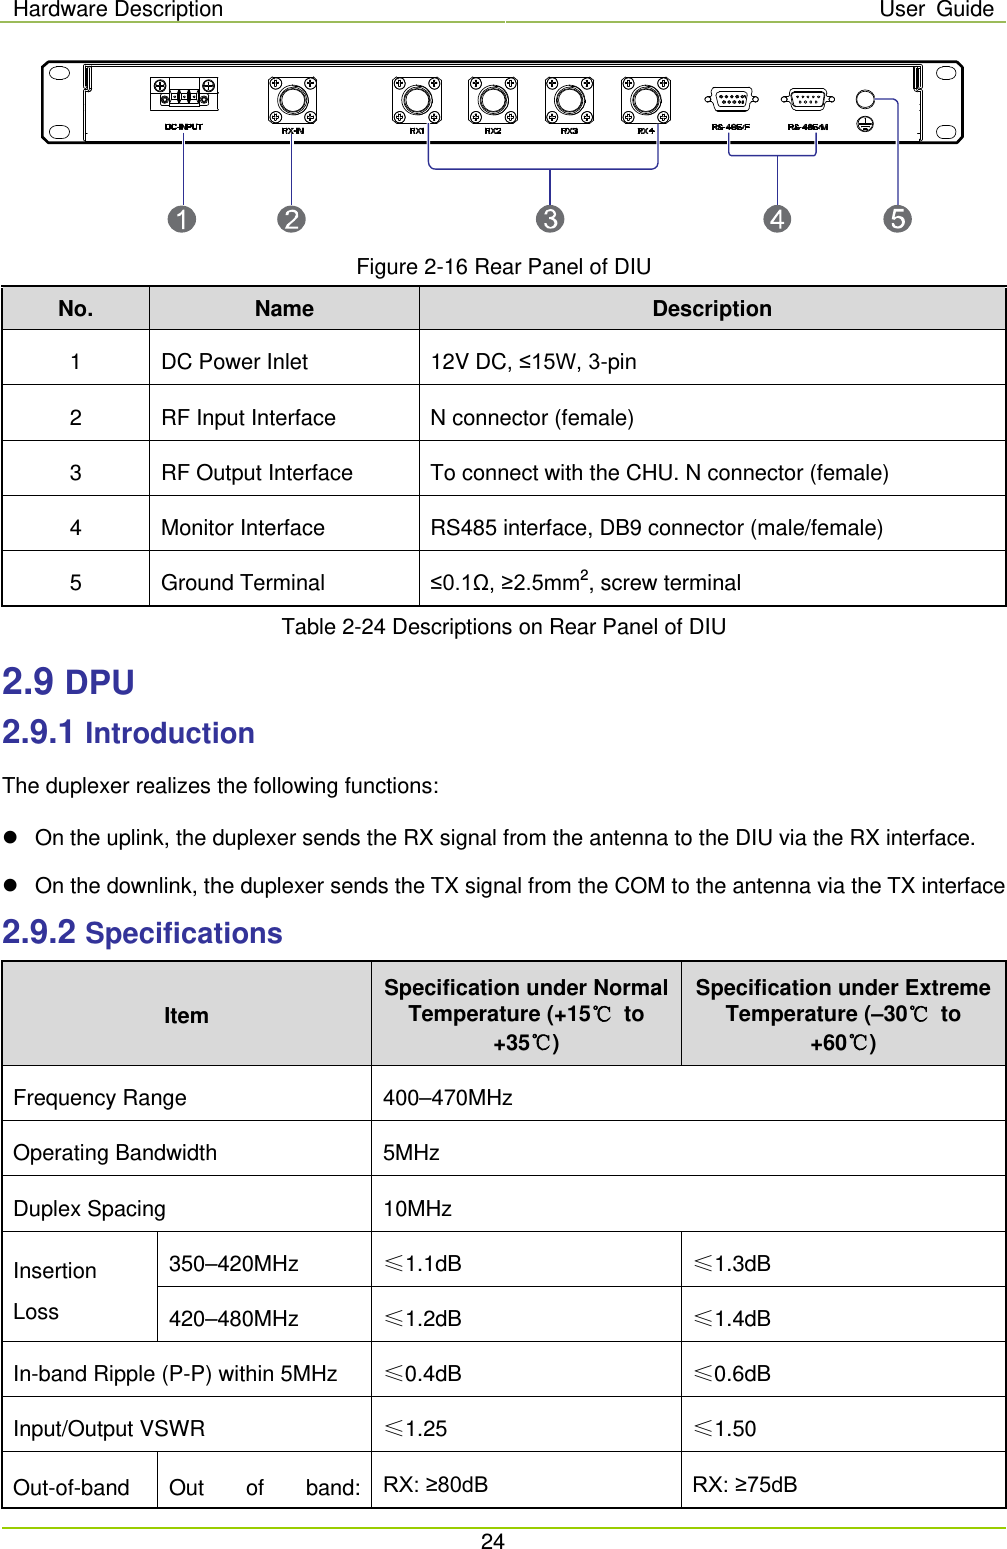 Hardware Description User Guide  24   Figure 2-16 Rear Panel of DIU No. Name Description 1  DC Power Inlet 12V DC, ≤15W, 3-pin 2  RF Input Interface N connector (female) 3  RF Output Interface To connect with the CHU. N connector (female) 4  Monitor Interface RS485 interface, DB9 connector (male/female) 5  Ground Terminal ≤0.1Ω, ≥2.5mm2, screw terminal Table 2-24 Descriptions on Rear Panel of DIU 2.9 DPU 2.9.1 Introduction The duplexer realizes the following functions:    On the uplink, the duplexer sends the RX signal from the antenna to the DIU via the RX interface.  On the downlink, the duplexer sends the TX signal from the COM to the antenna via the TX interface 2.9.2 Specifications Item Specification under Normal Temperature (+15℃ to +35℃) Specification under Extreme Temperature (–30℃ to +60℃) Frequency Range  400–470MHz Operating Bandwidth 5MHz Duplex Spacing 10MHz Insertion Loss 350–420MHz ≤1.1dB ≤1.3dB 420–480MHz ≤1.2dB ≤1.4dB In-band Ripple (P-P) within 5MHz ≤0.4dB ≤0.6dB Input/Output VSWR ≤1.25 ≤1.50 Out-of-band Out of band: RX: ≥80dB RX: ≥75dB 